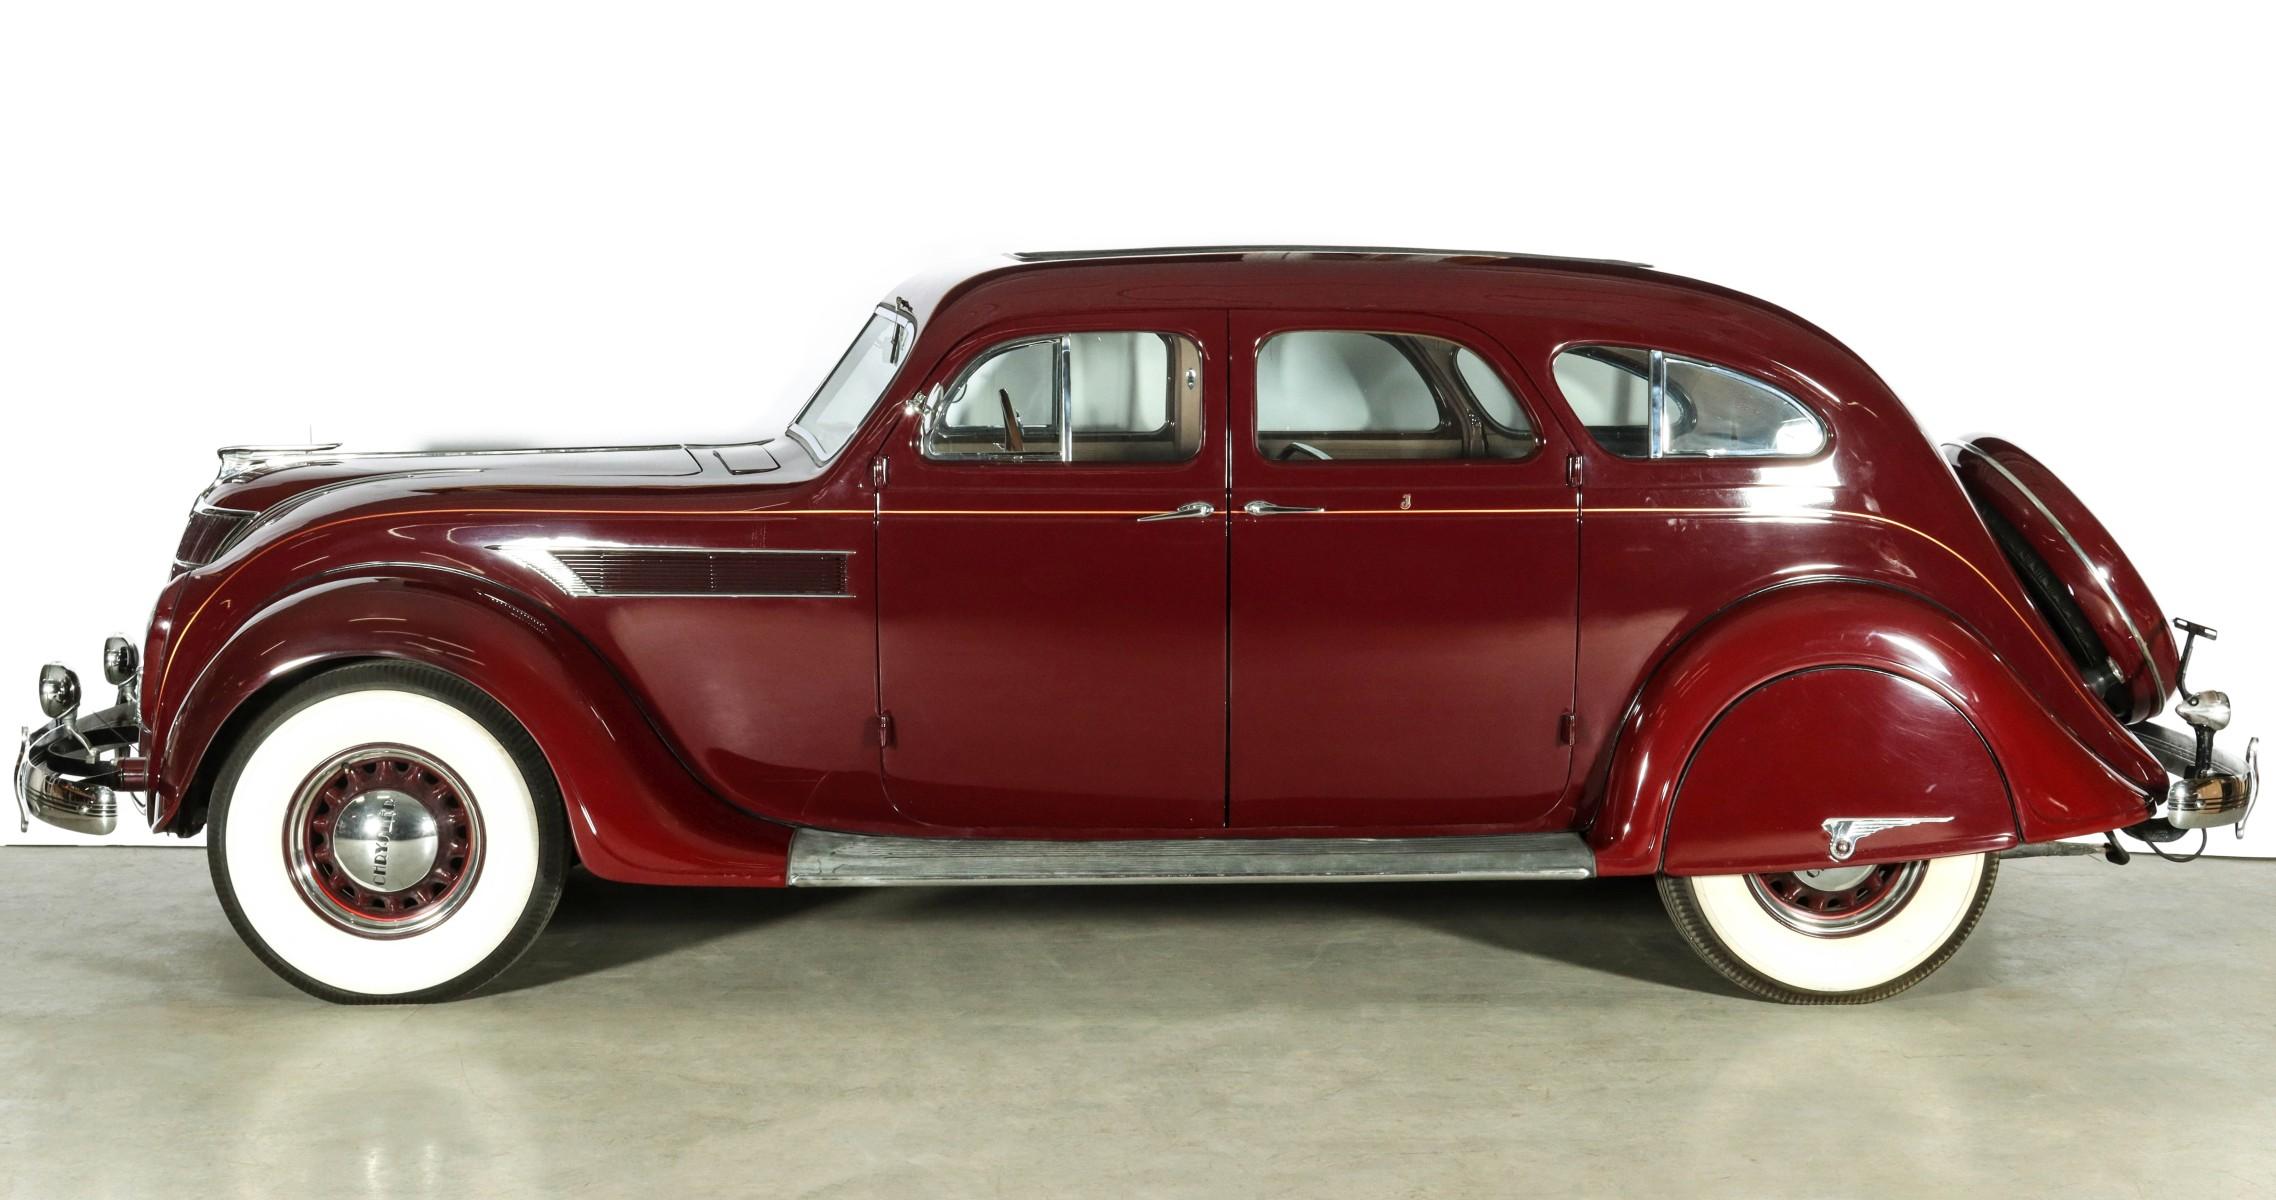 A BEAUTIFULLY RESTORED 1935 CHRYSLER AIRFLOW IMPERIAL